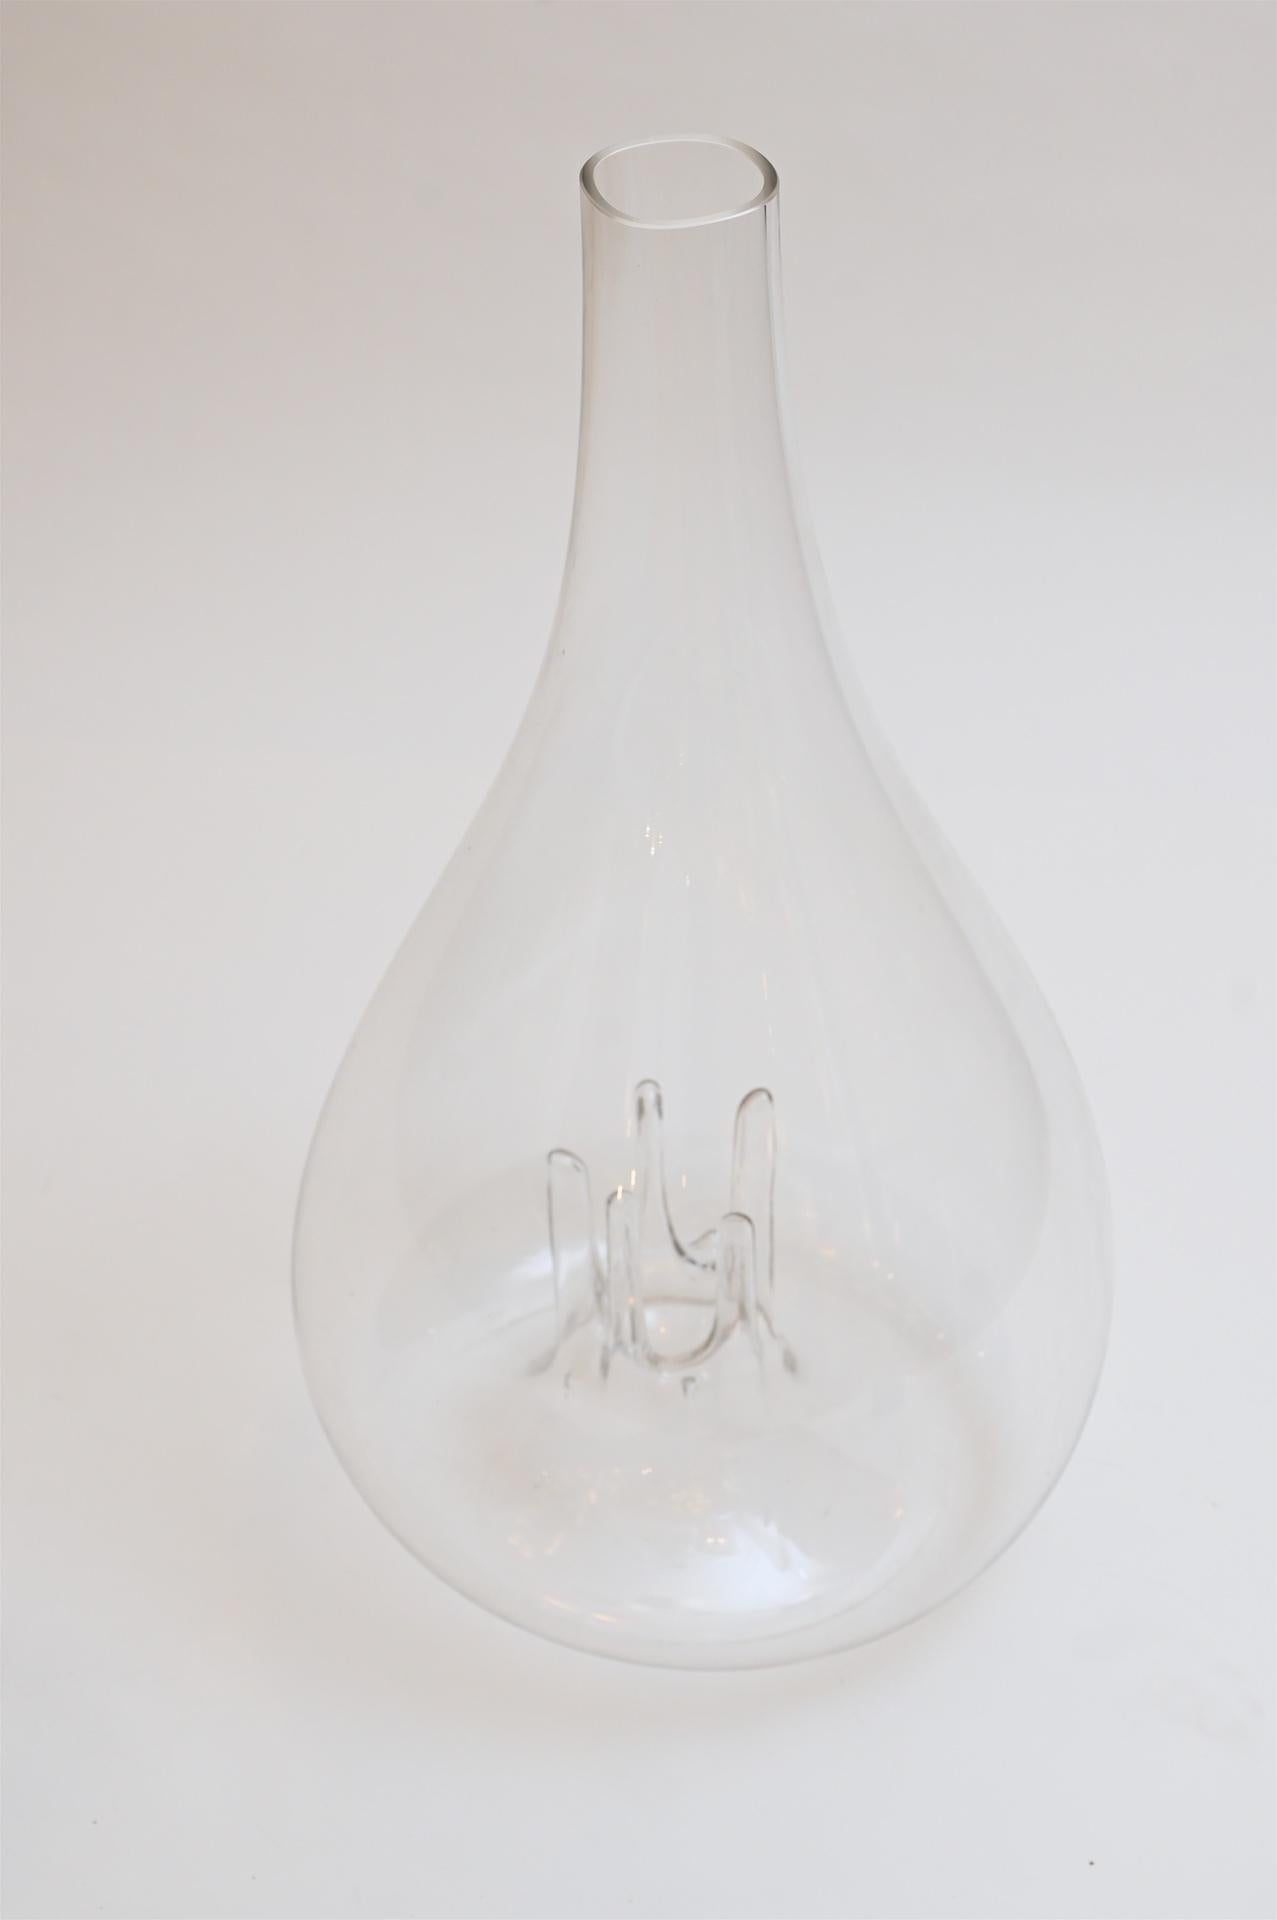 An impressive Murano glass vase by Toni Zuccheri for VeArt, 1970. The largest of this series. 

This vase is part of an experimental collection of crystal glass. Made by Zuccheri blowing glass against different shaped moulds and worked with